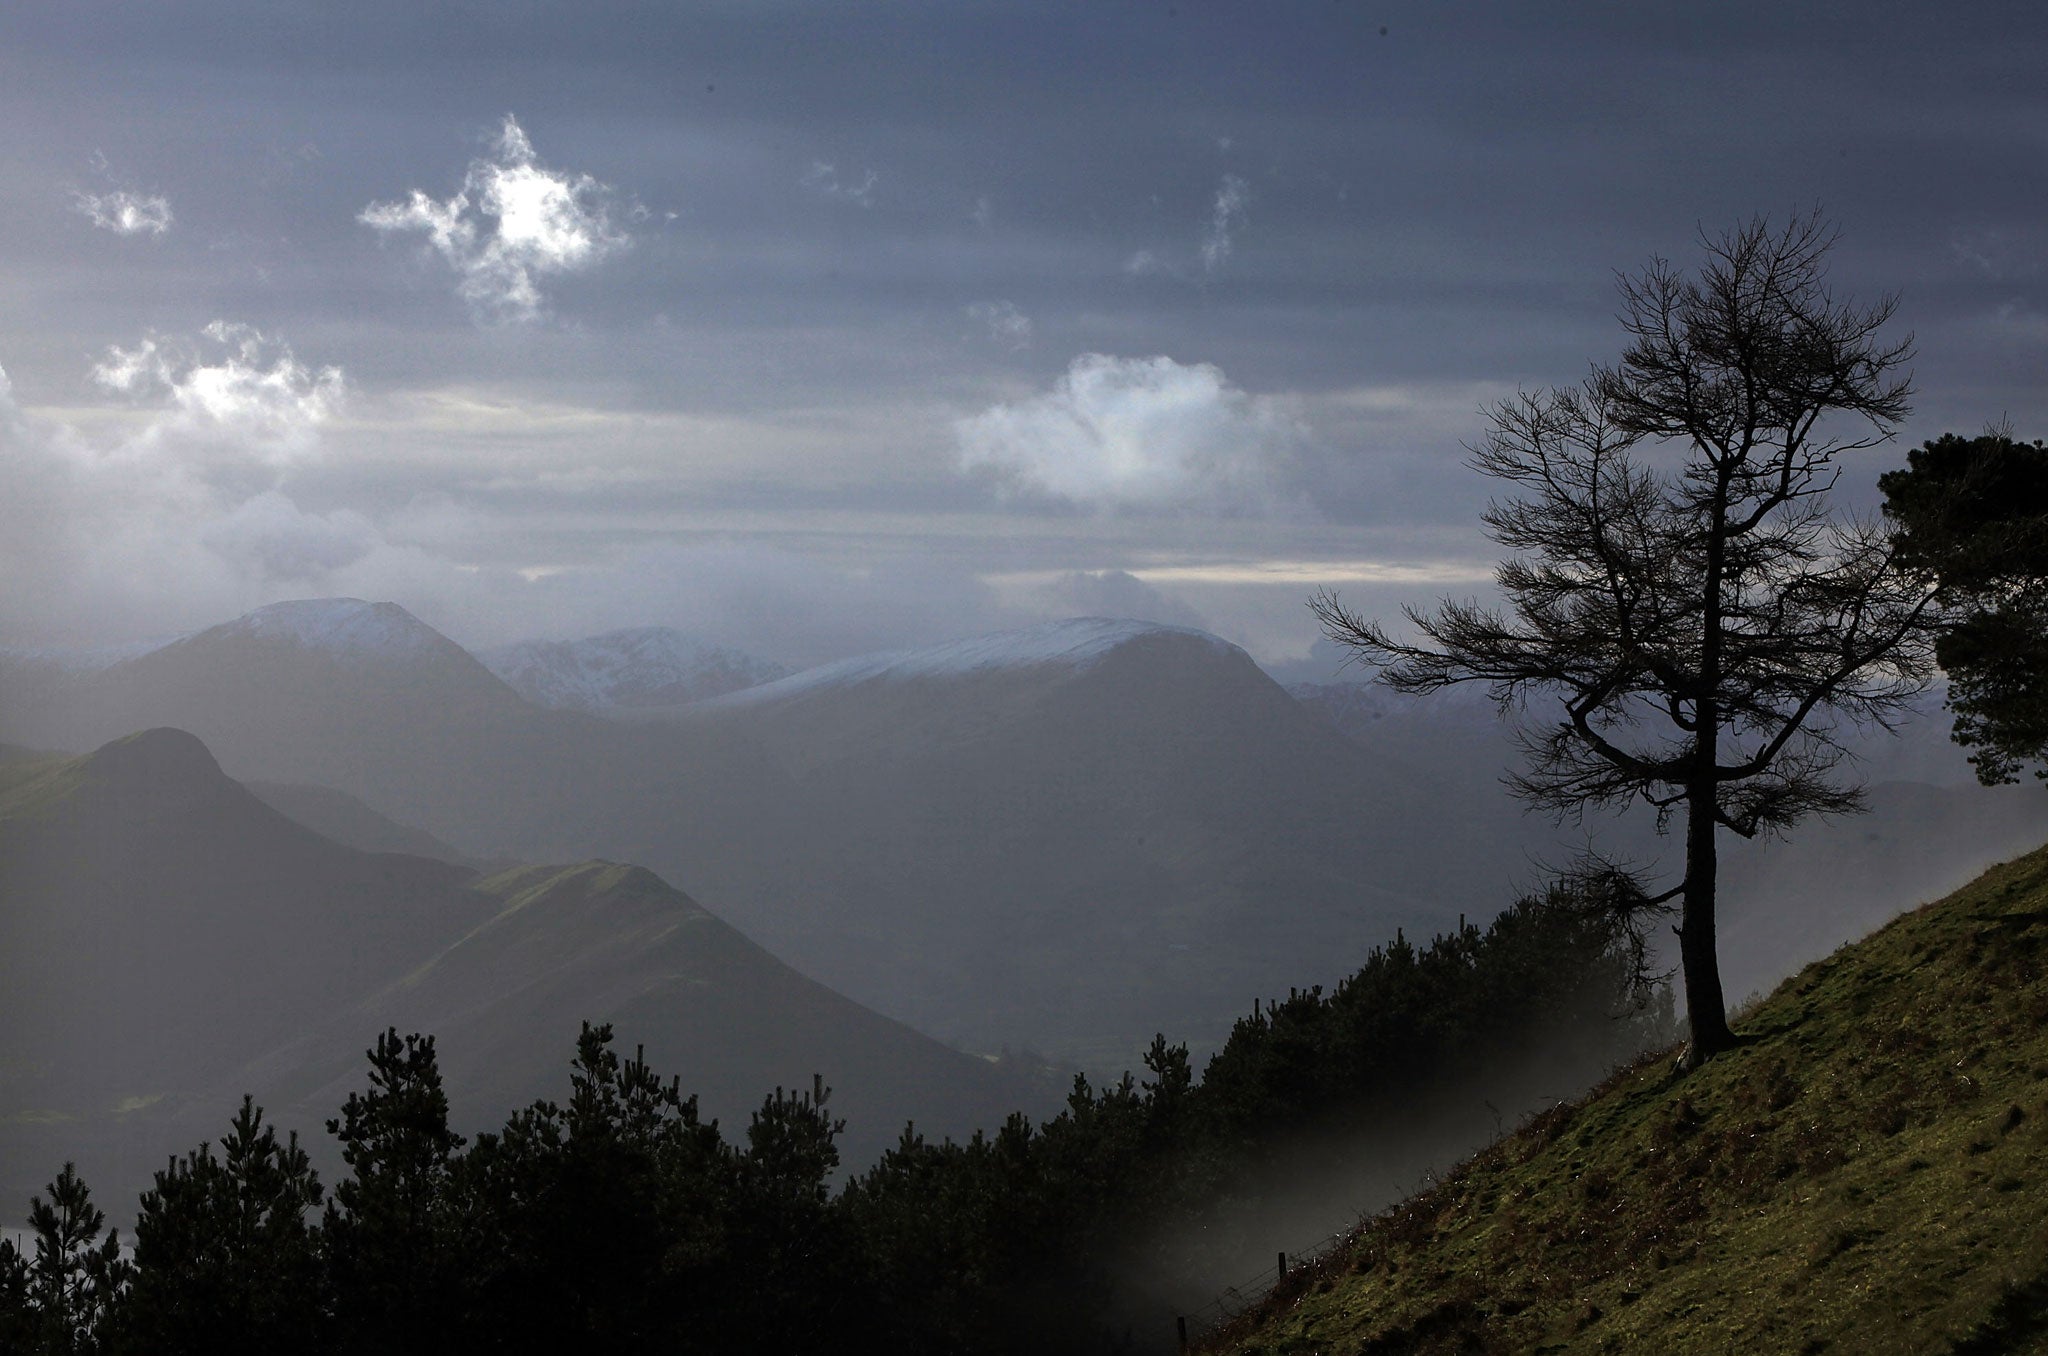 A view of across the Lakeland Fells from on top of Latrigg on December 4, 2009 in Keswick, England.